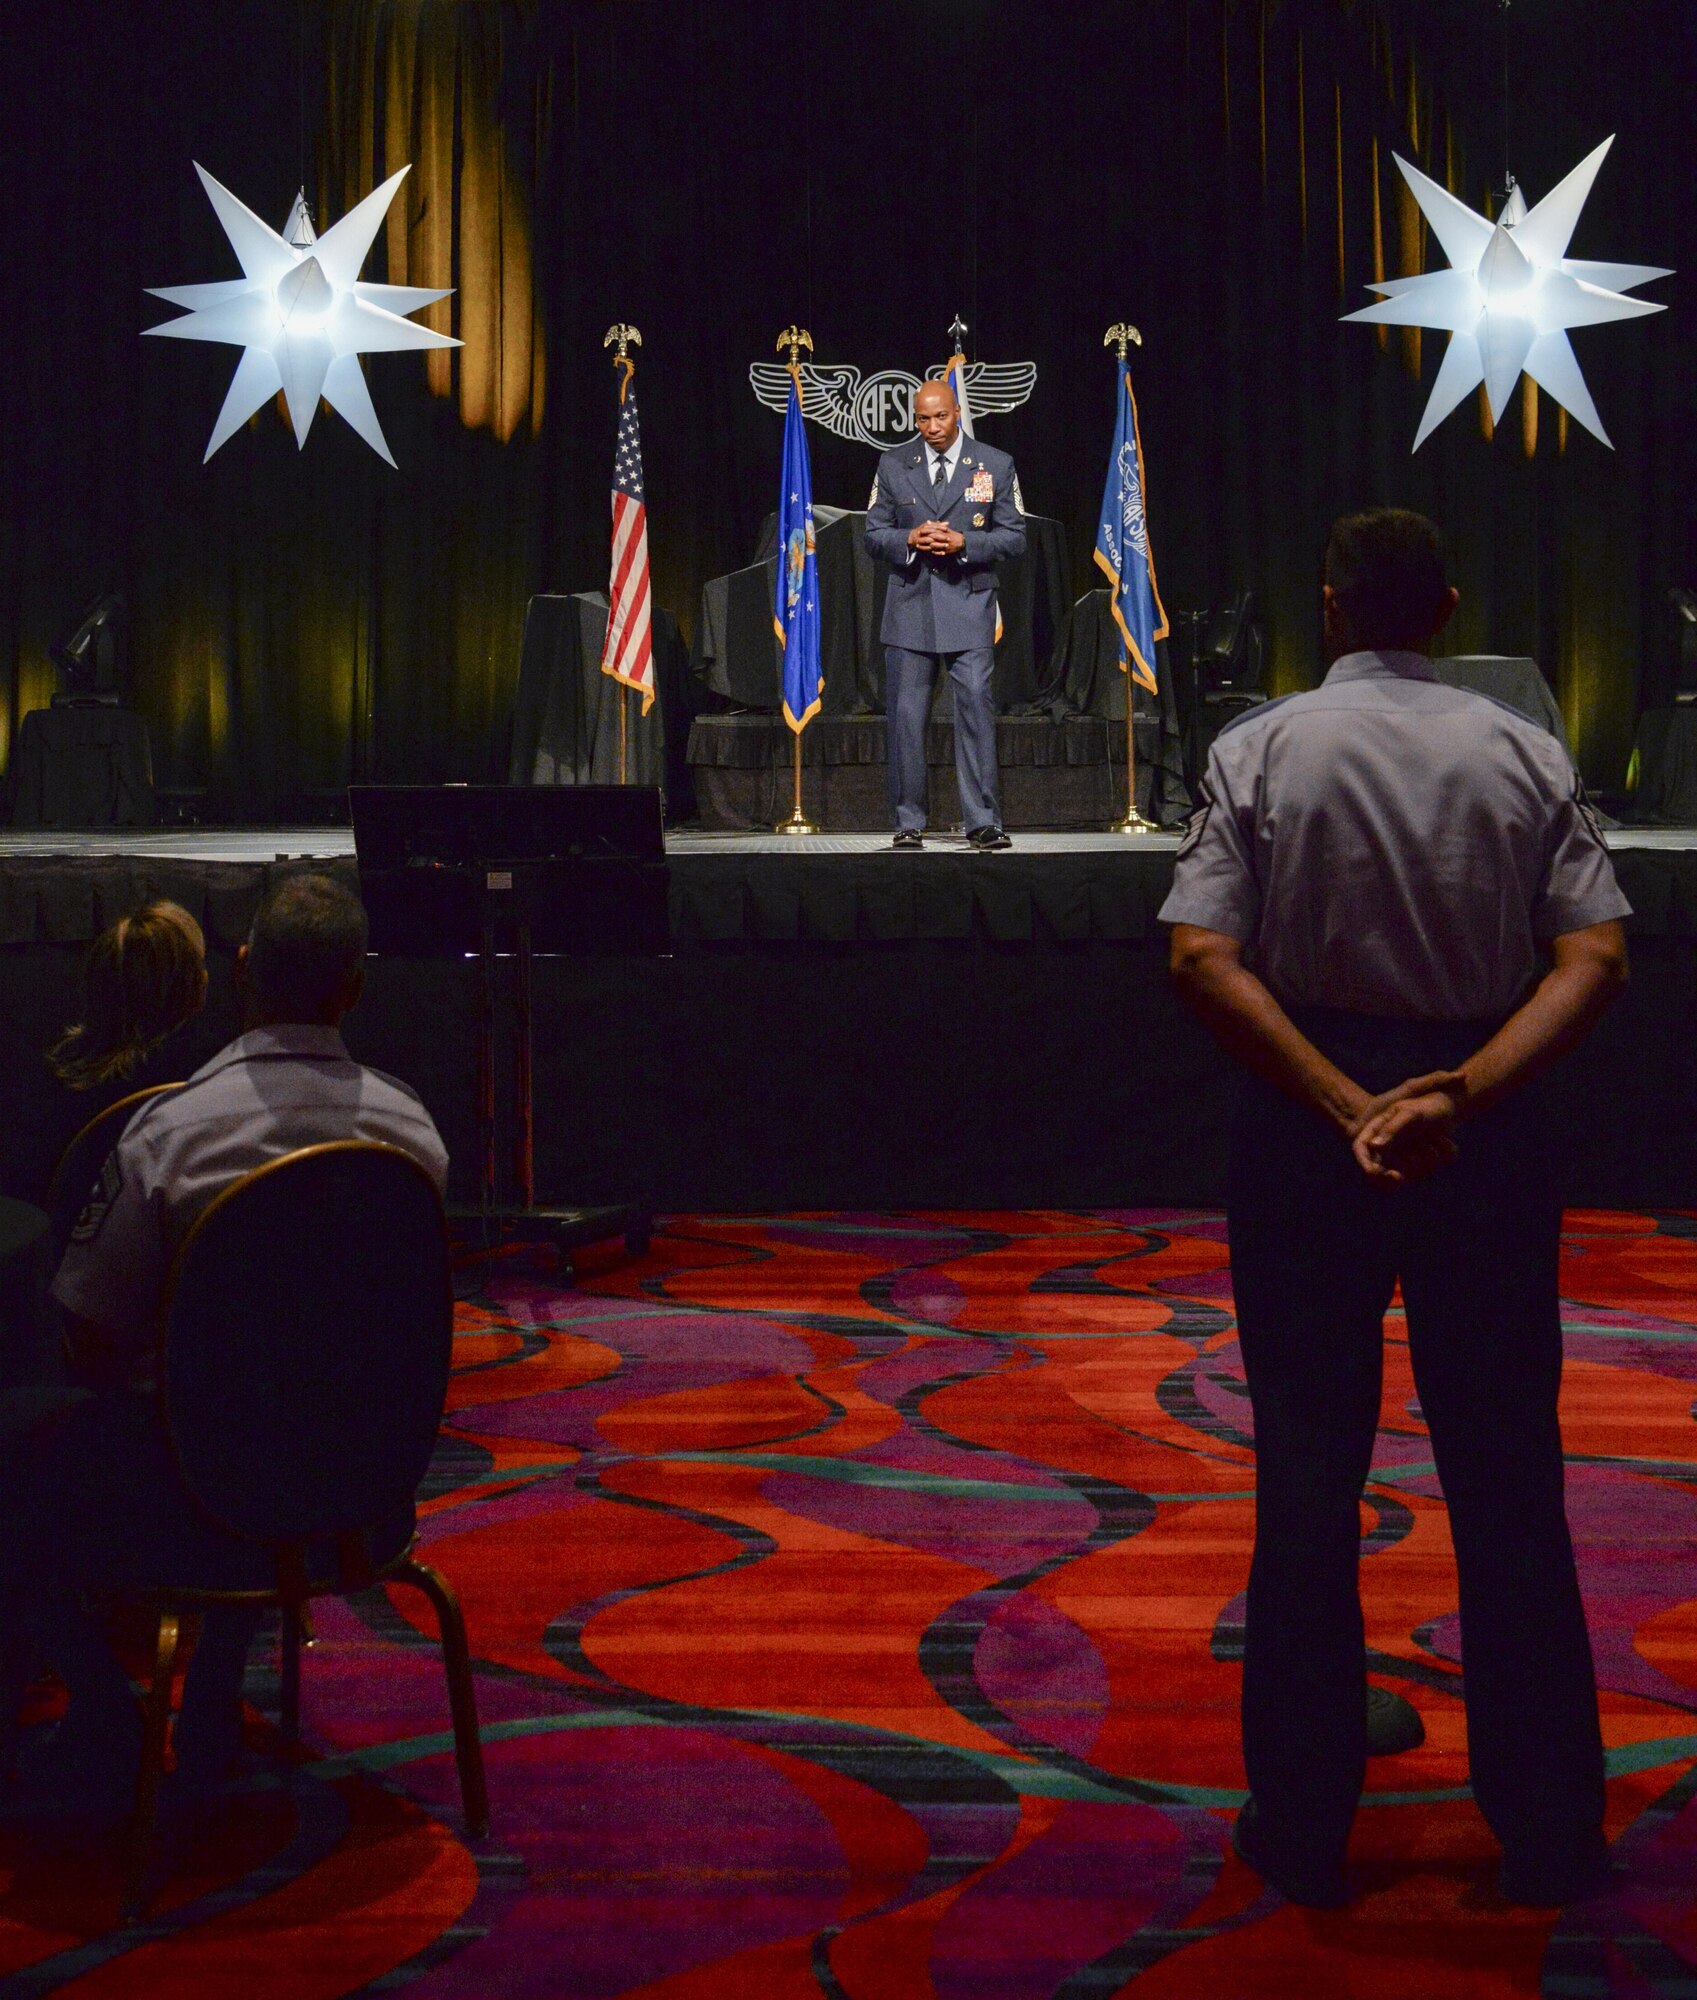 Chief Master Sergeant of the Air Force Kaleth O. Wright speaks to Airmen at a professional development forum July 24 during the Air Force Sergeants Association International Convention held in Reno, Nevada. The Professional Airman's Conference provided the opportunity for Airmen to learn from past and present enlisted leadership. (U.S. Air Force photo by Senior Airman Amber Carter)